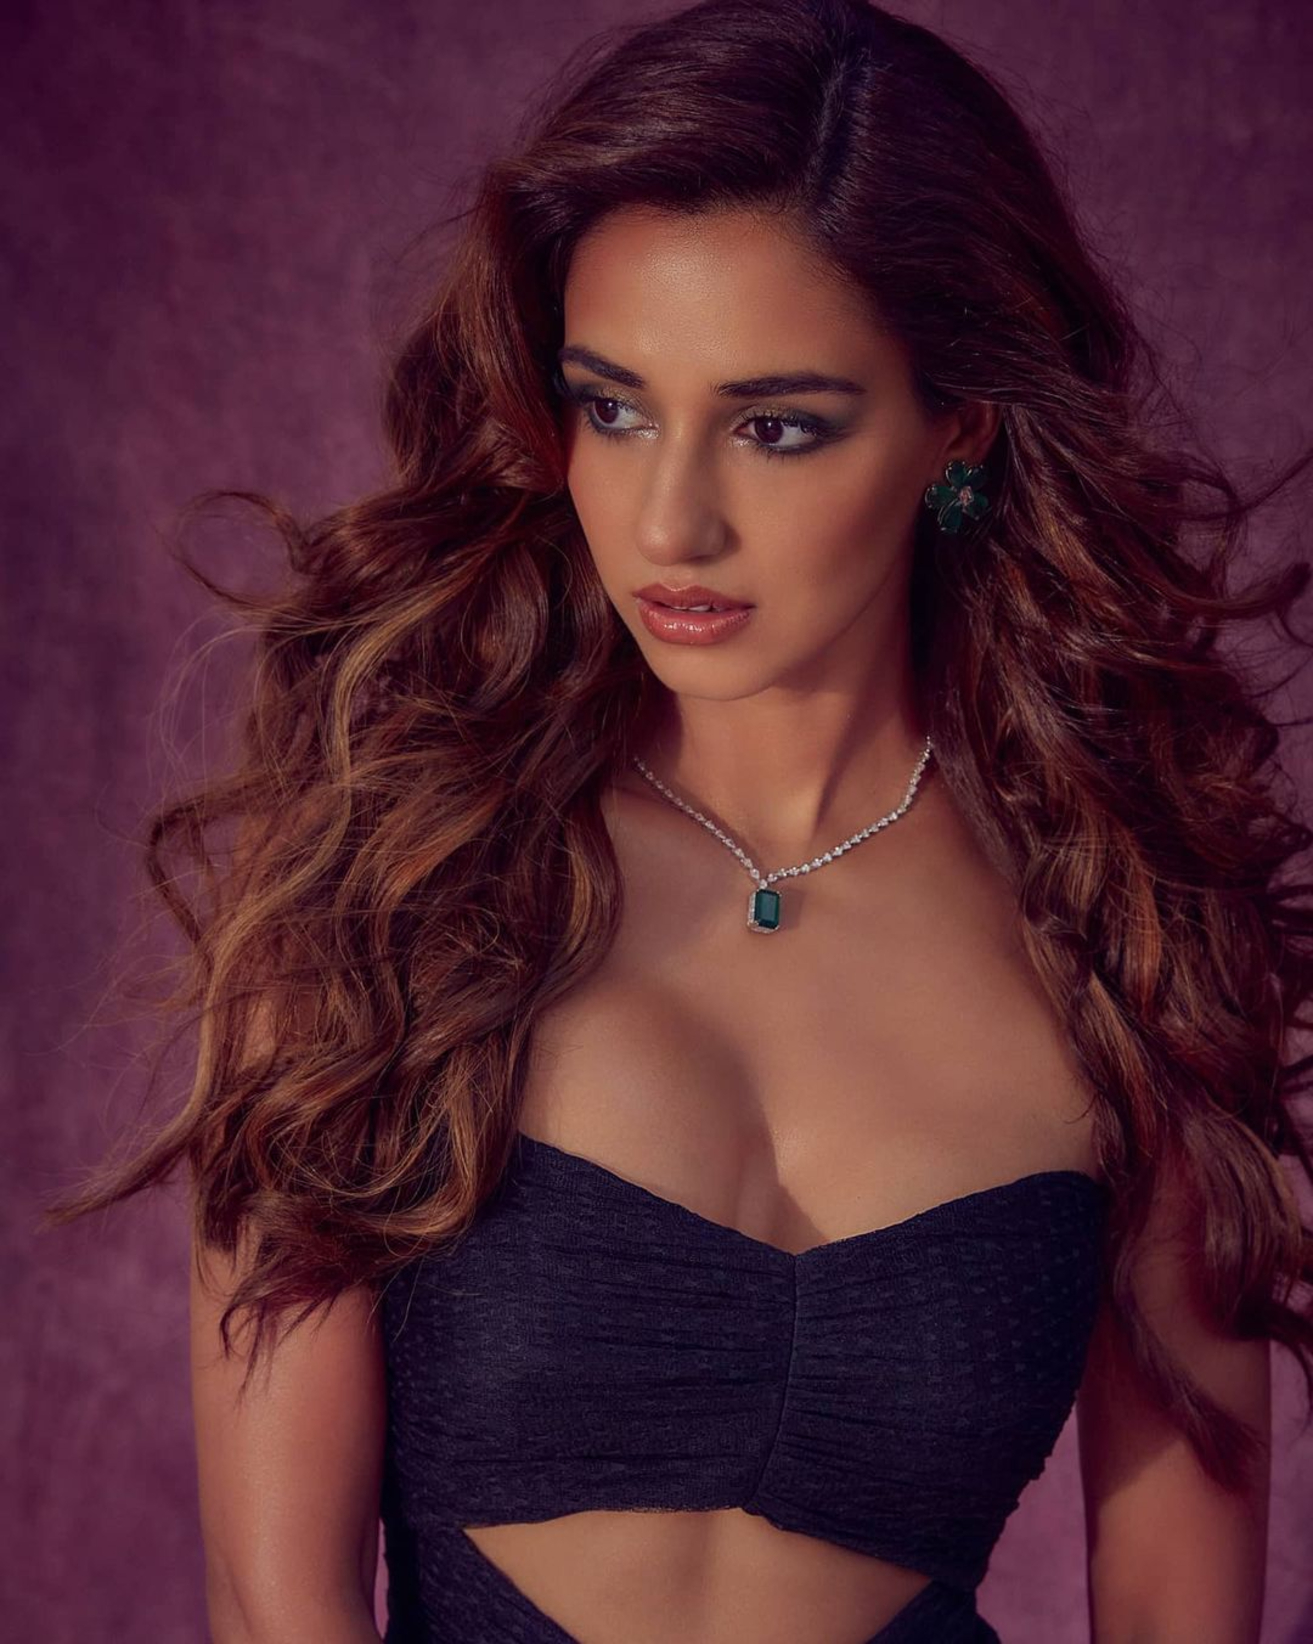  Bollywood actress Disha Patani has once again raised the temperatures on social media with her gorgeously hot looks in a new photoshoot. (Credit: Instagram)